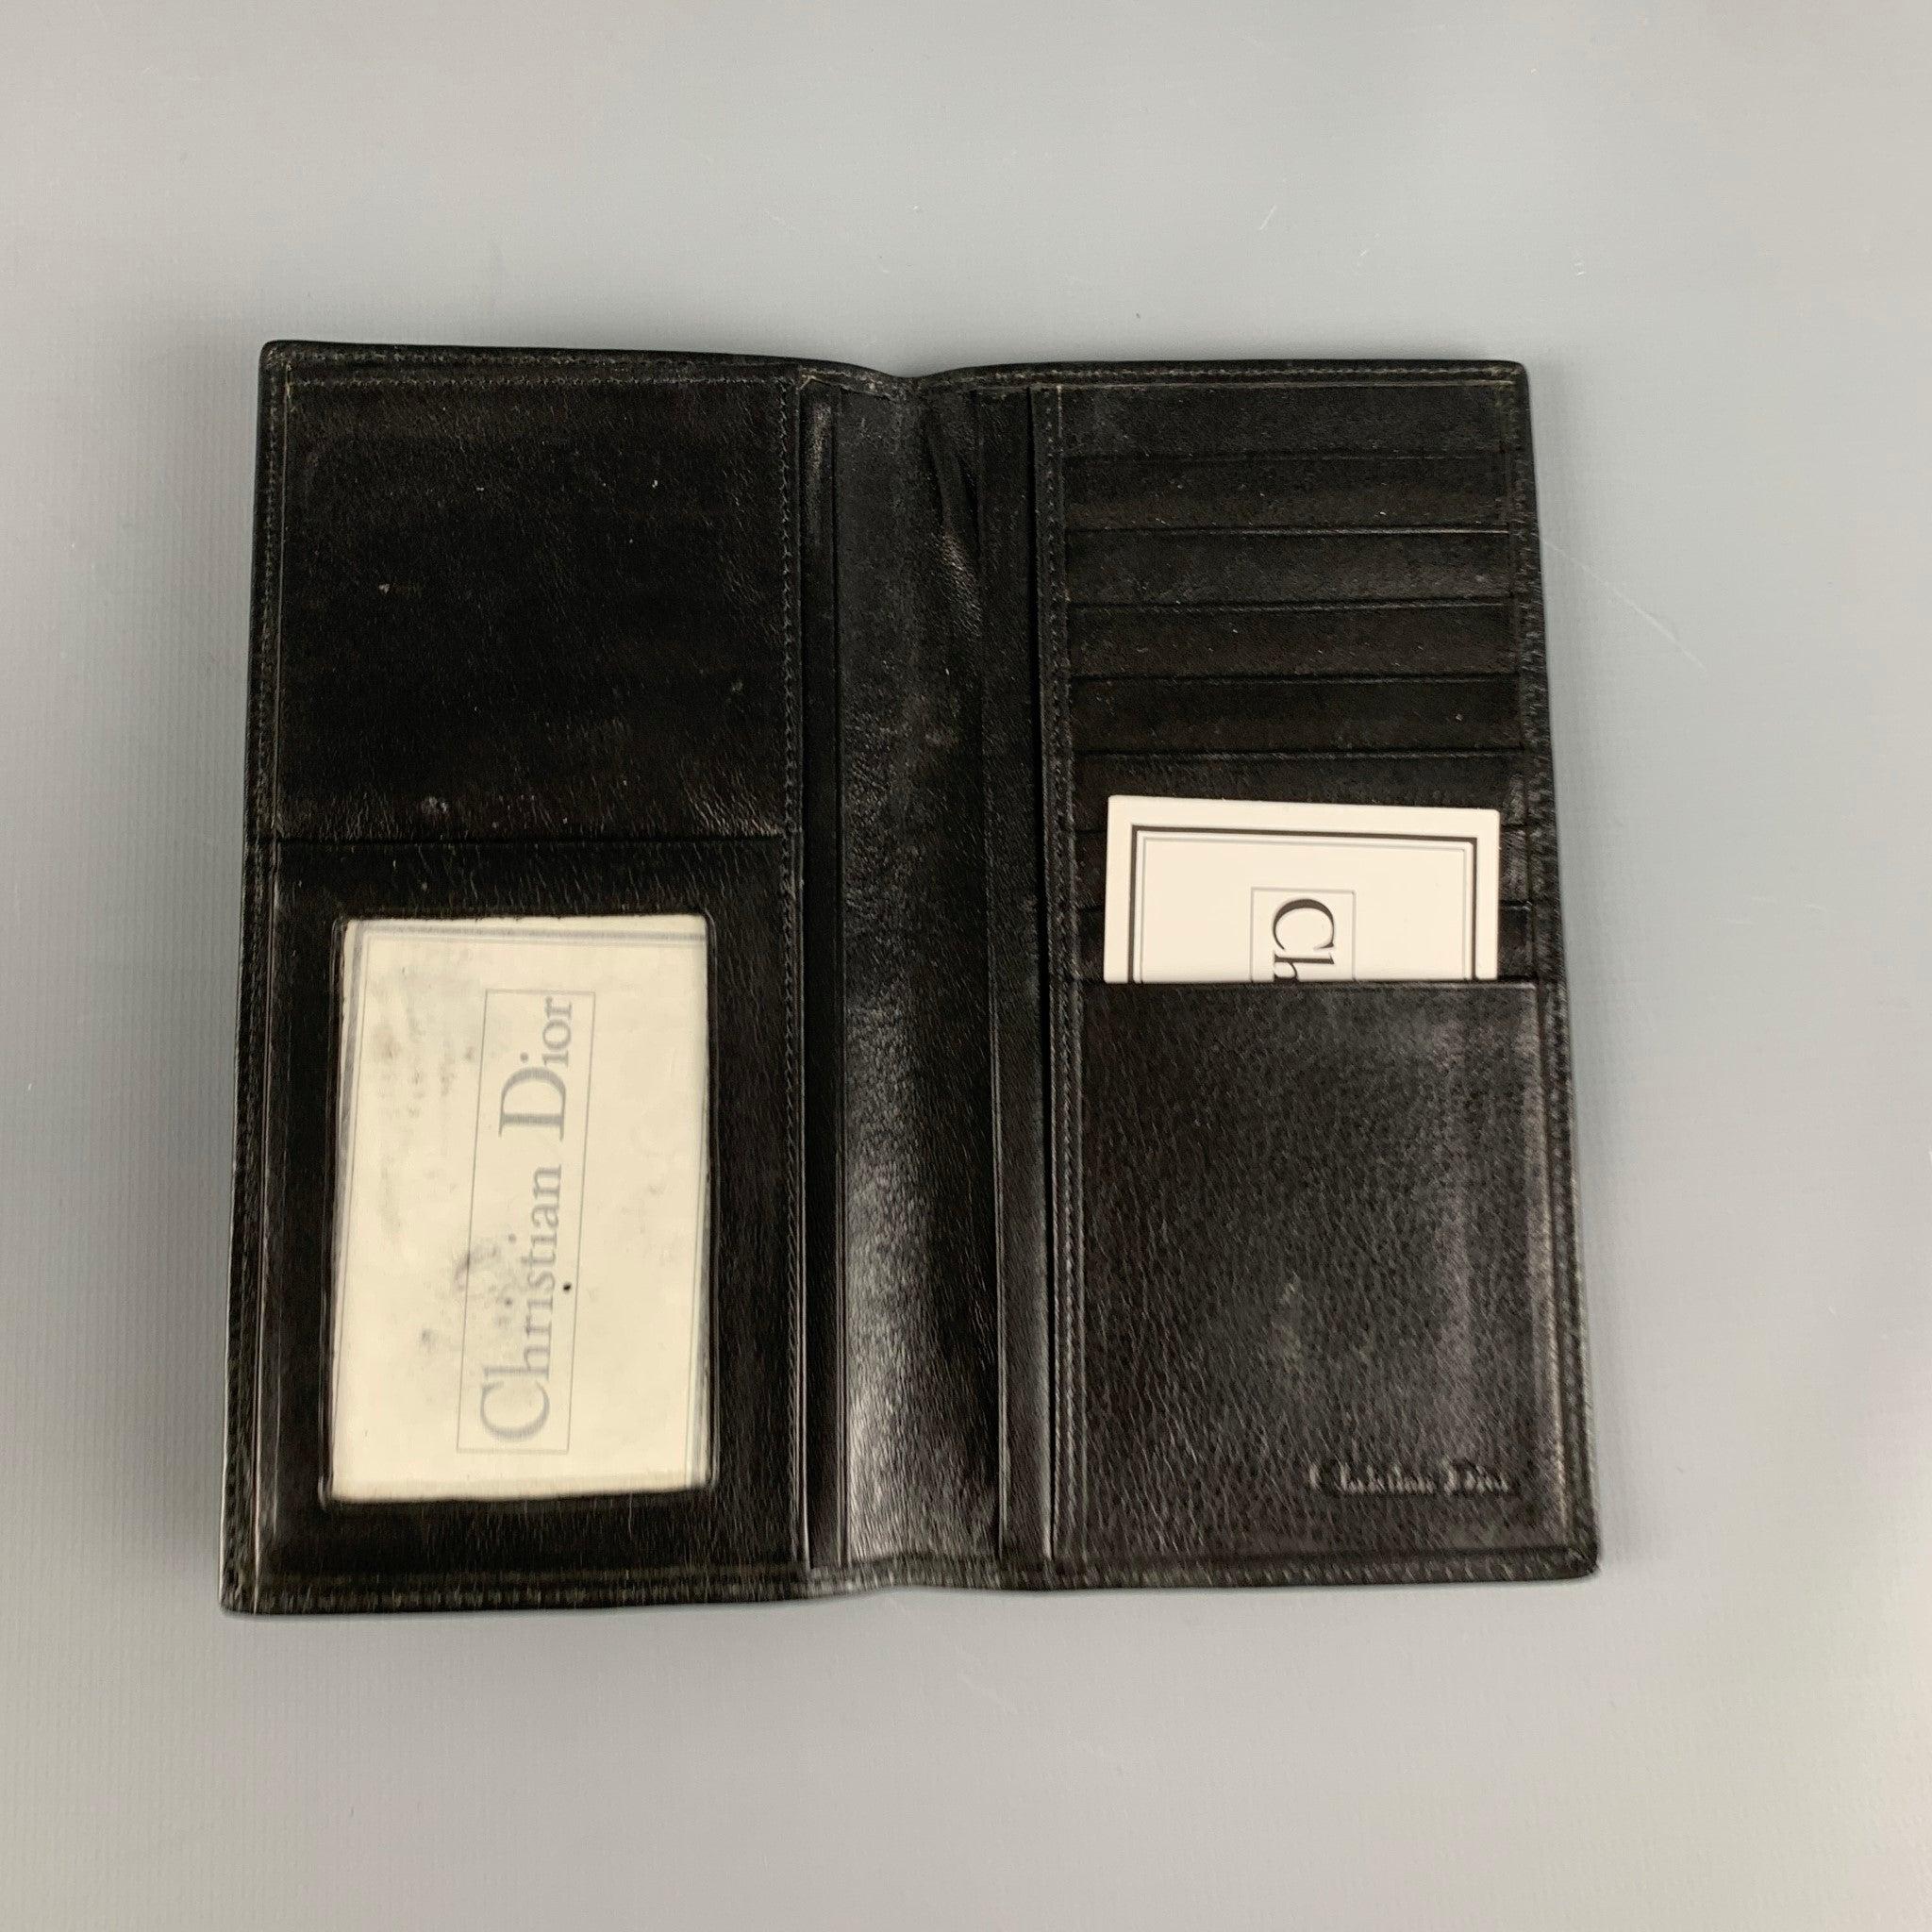 CHRISTIAN DIOR Black Leather Wallet In Good Condition For Sale In San Francisco, CA